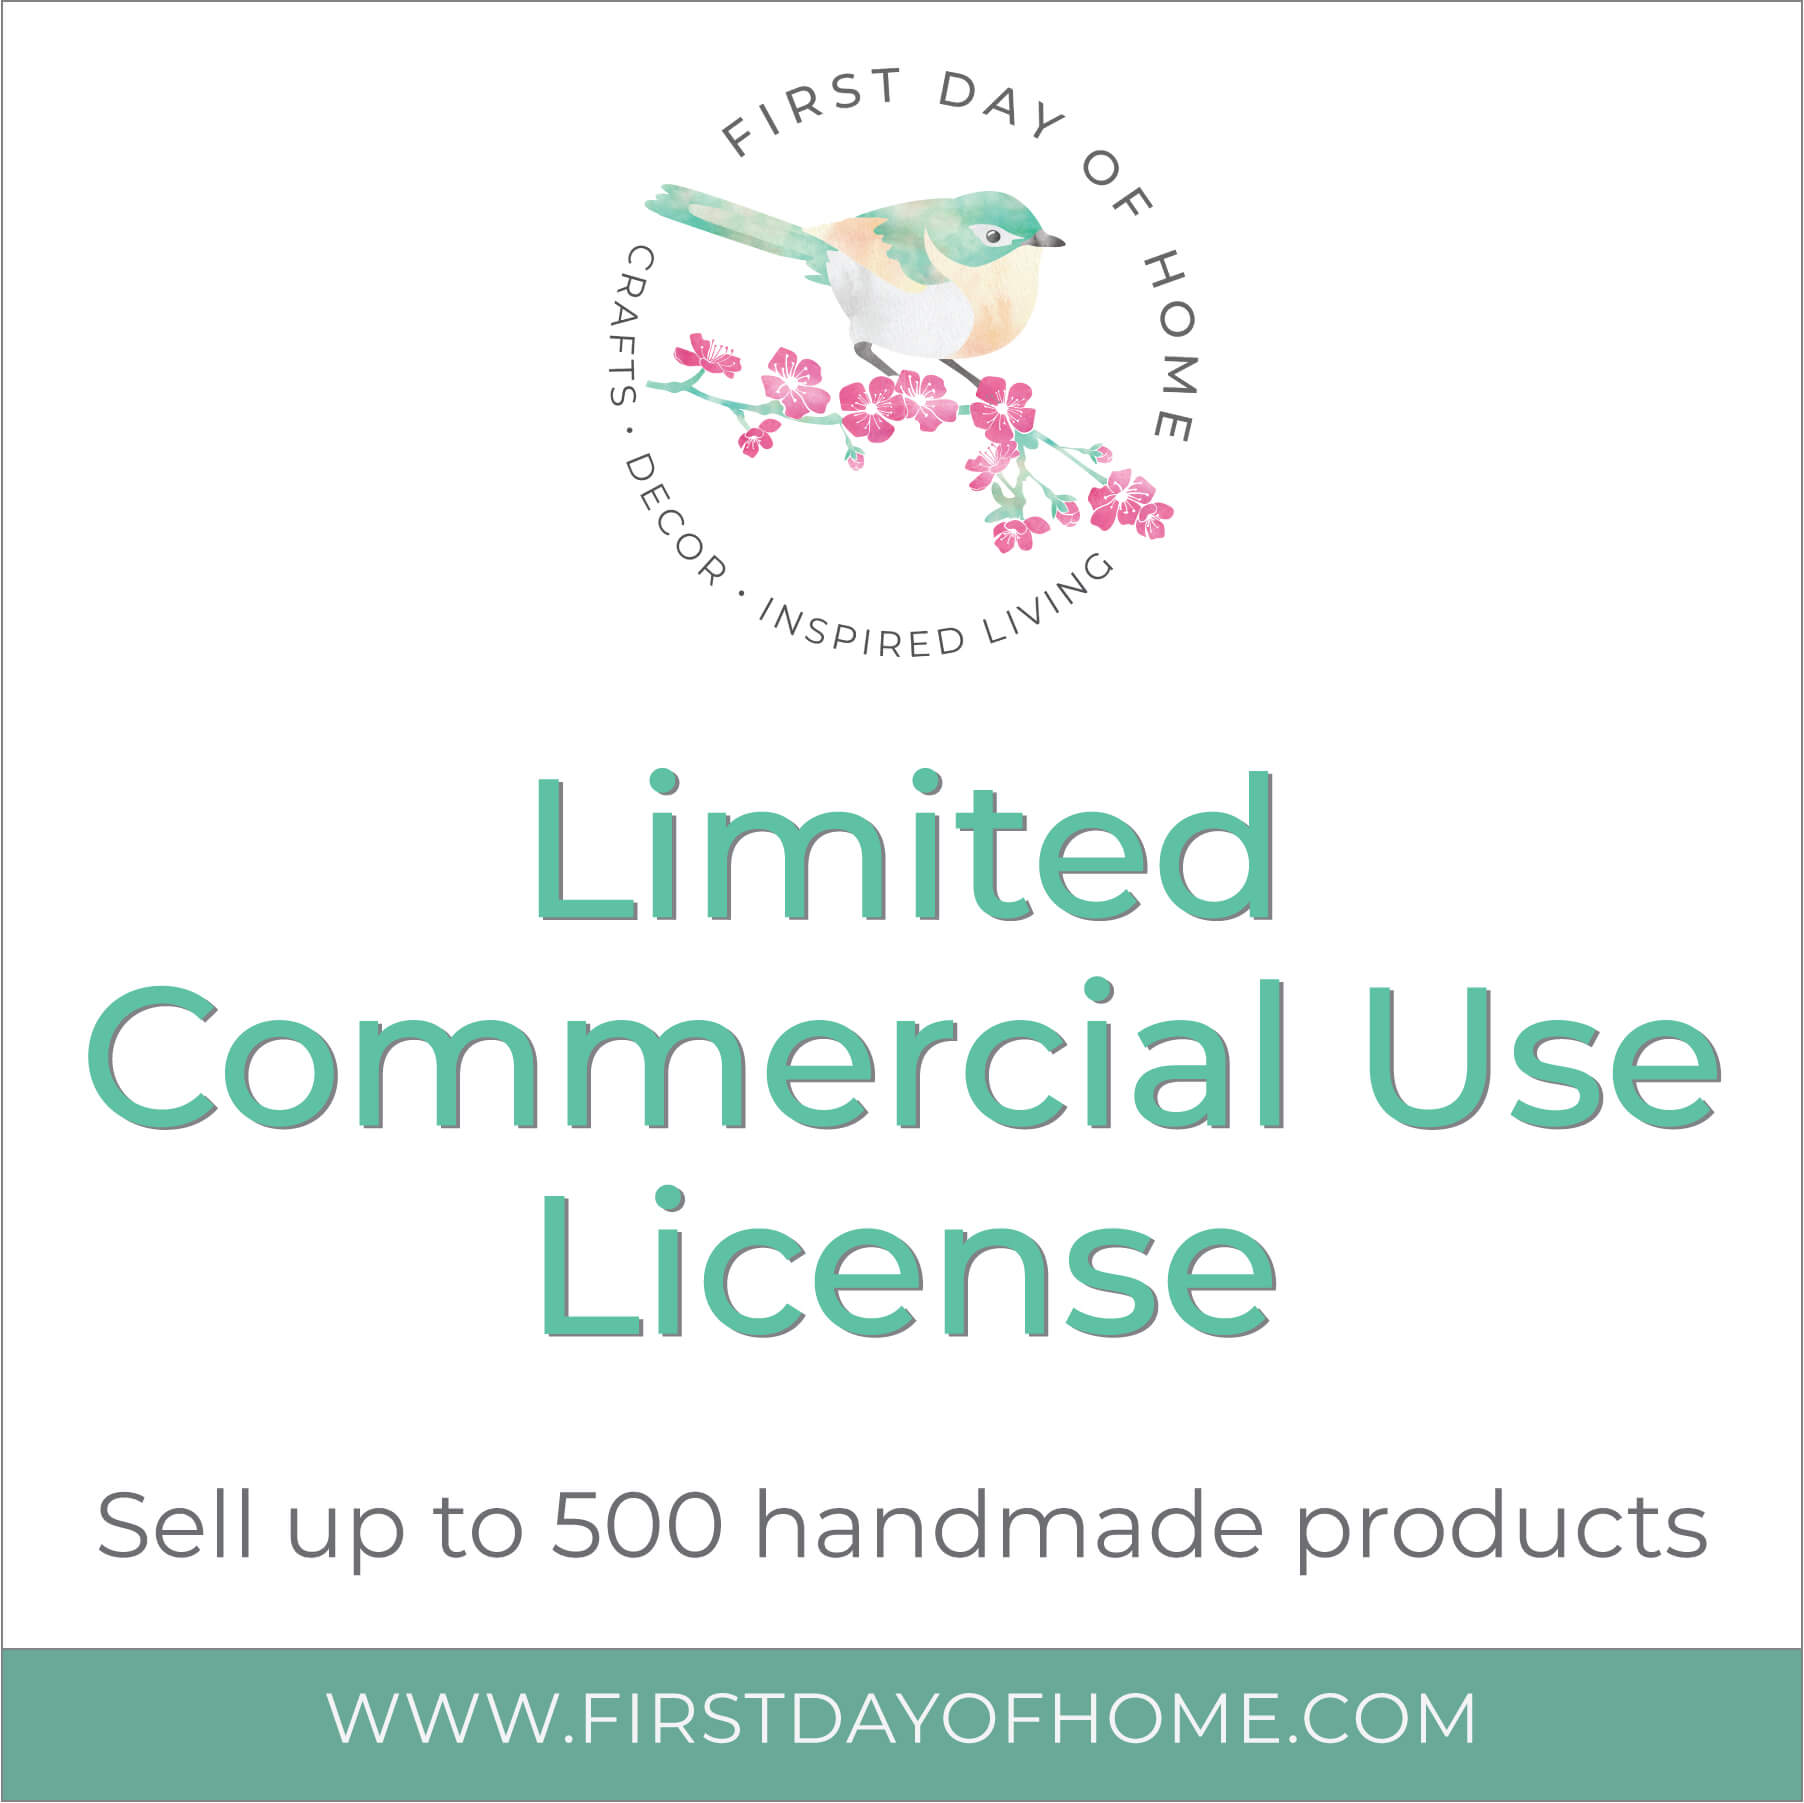 First Day of Home logo with the words "Limited Commercial Use License - Sell up to 500 handmade products"